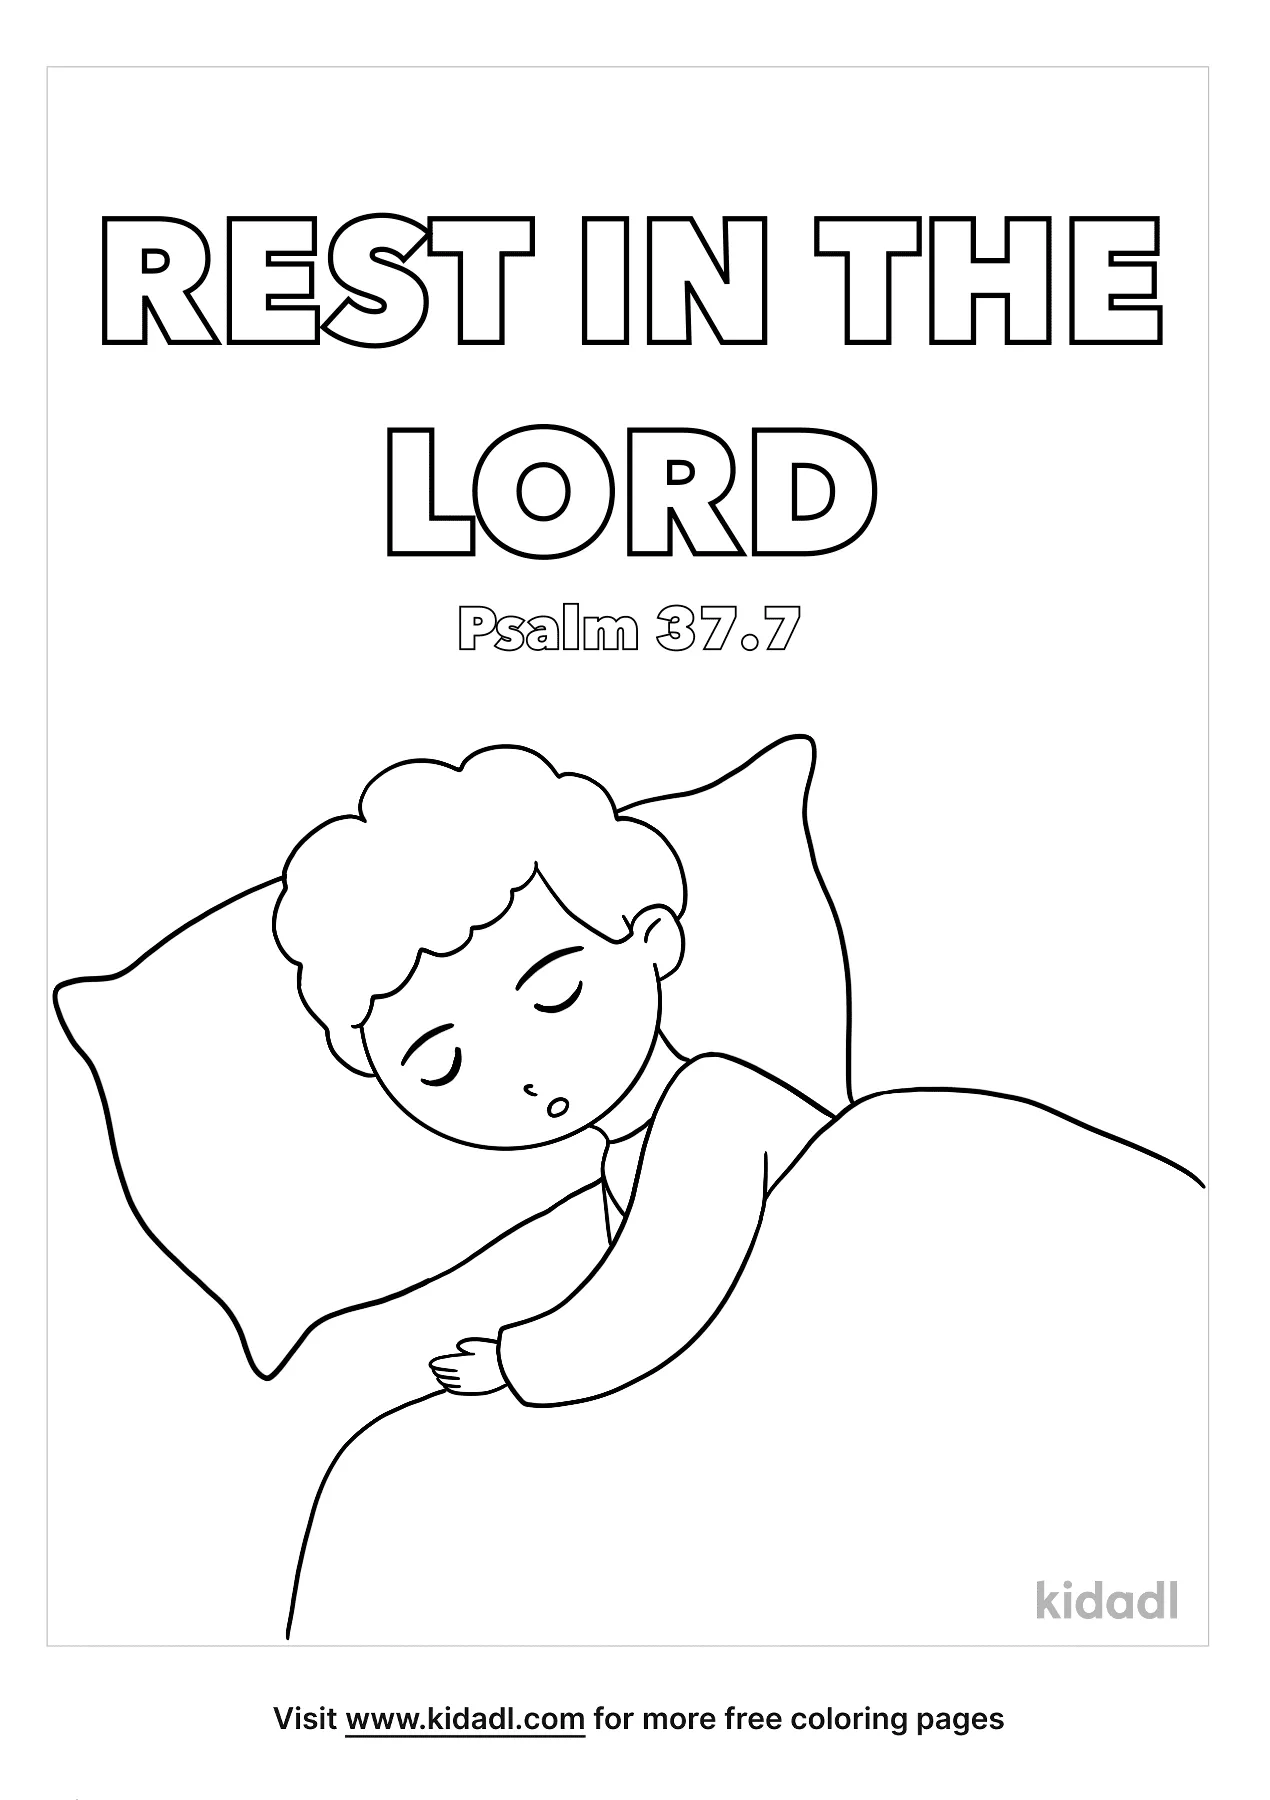 Rest In The Lord Coloring Page